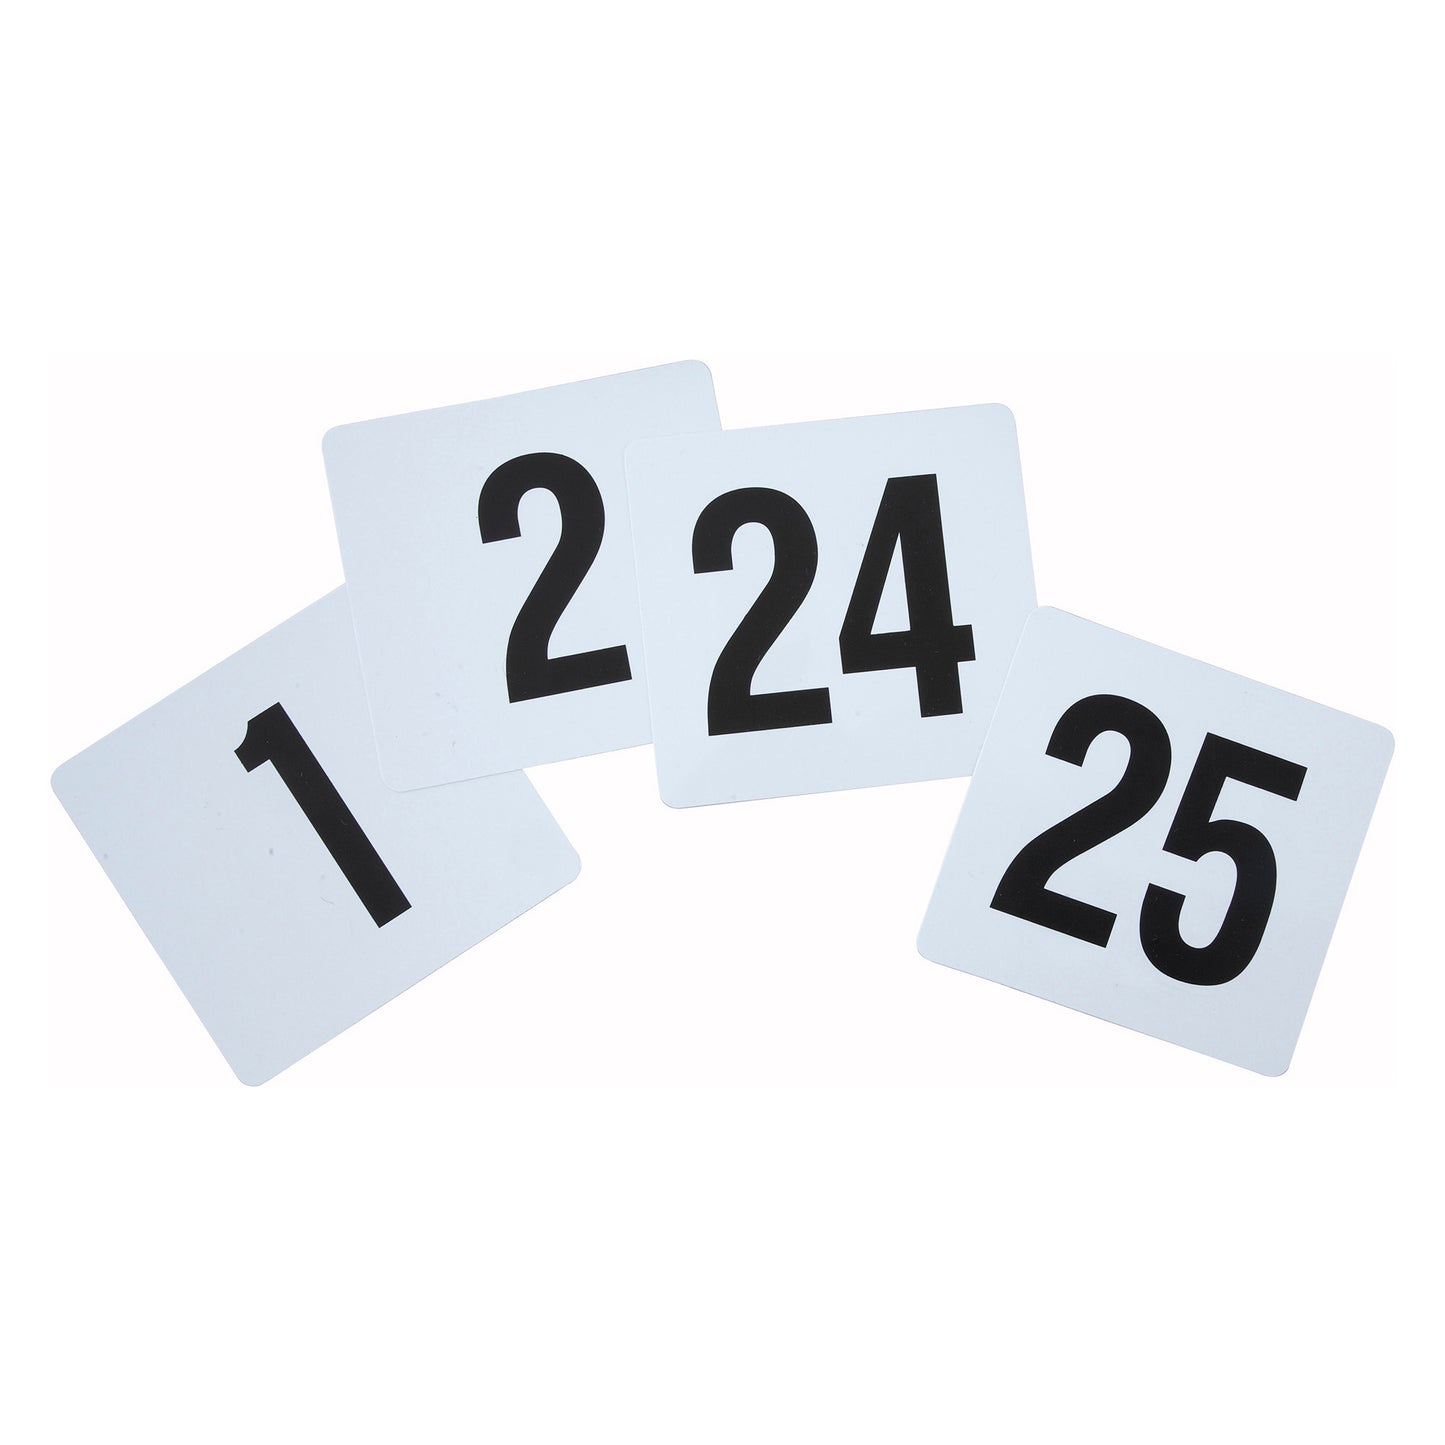 TBN-25 - Plastic Table Numbers, 1-25